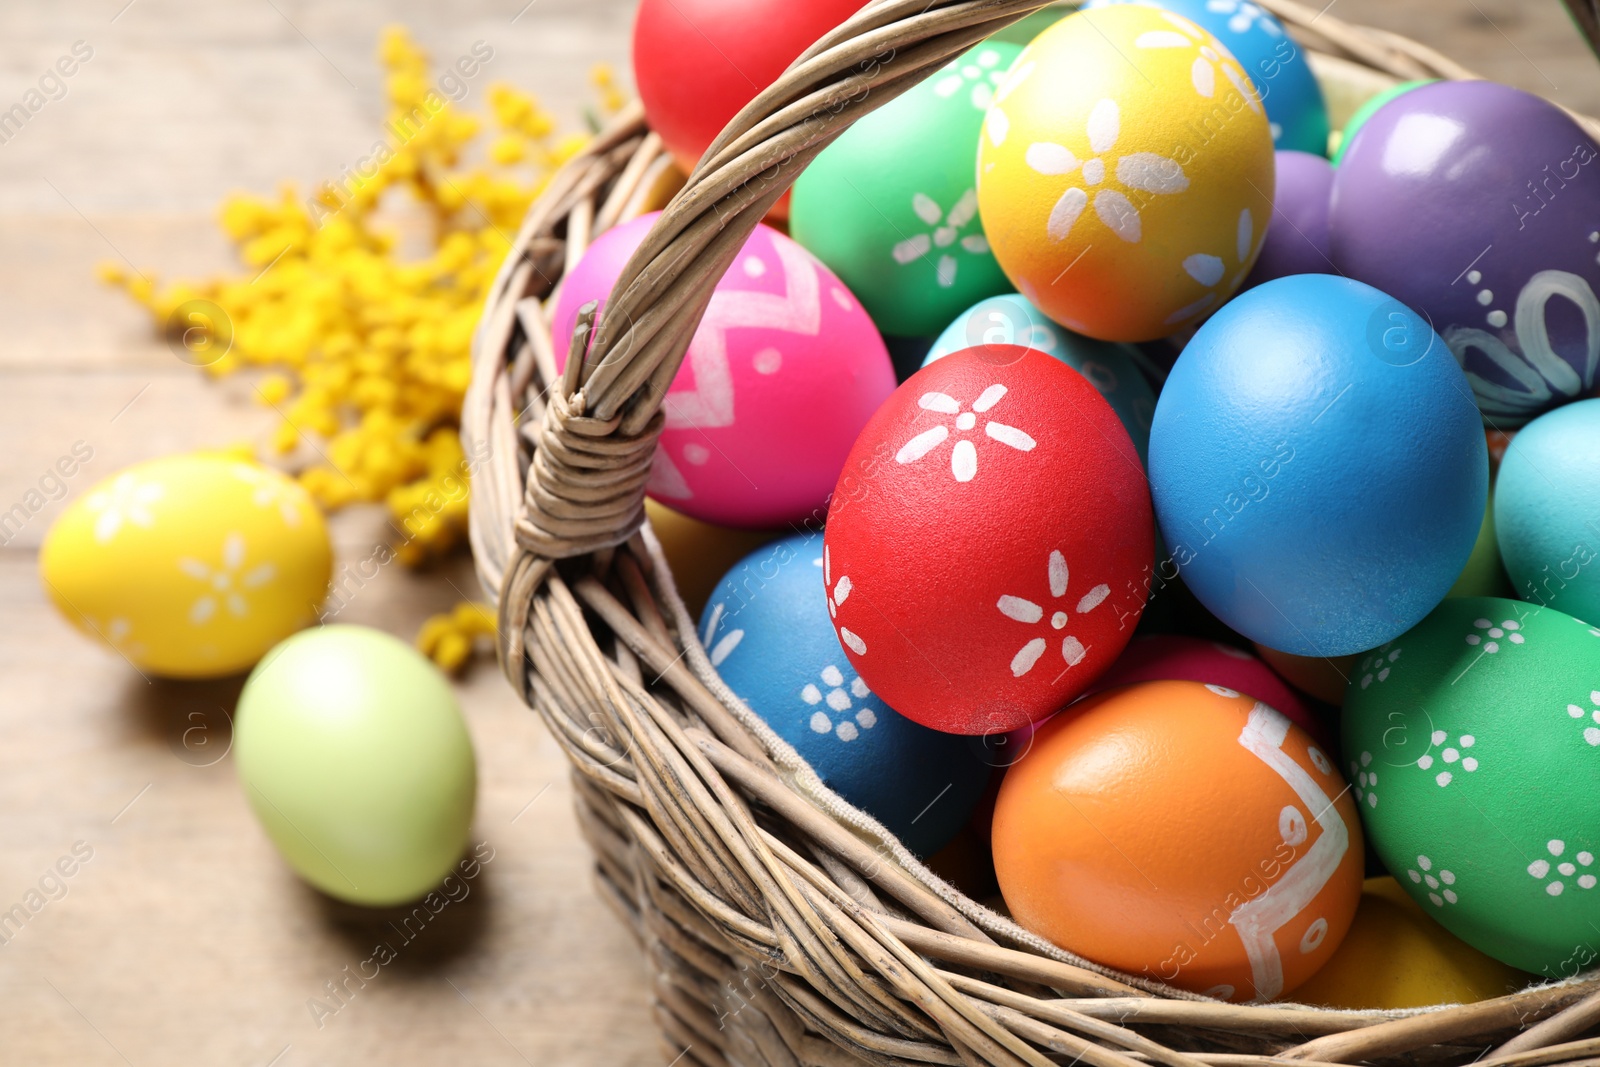 Photo of Basket with colorful Easter eggs on table, closeup